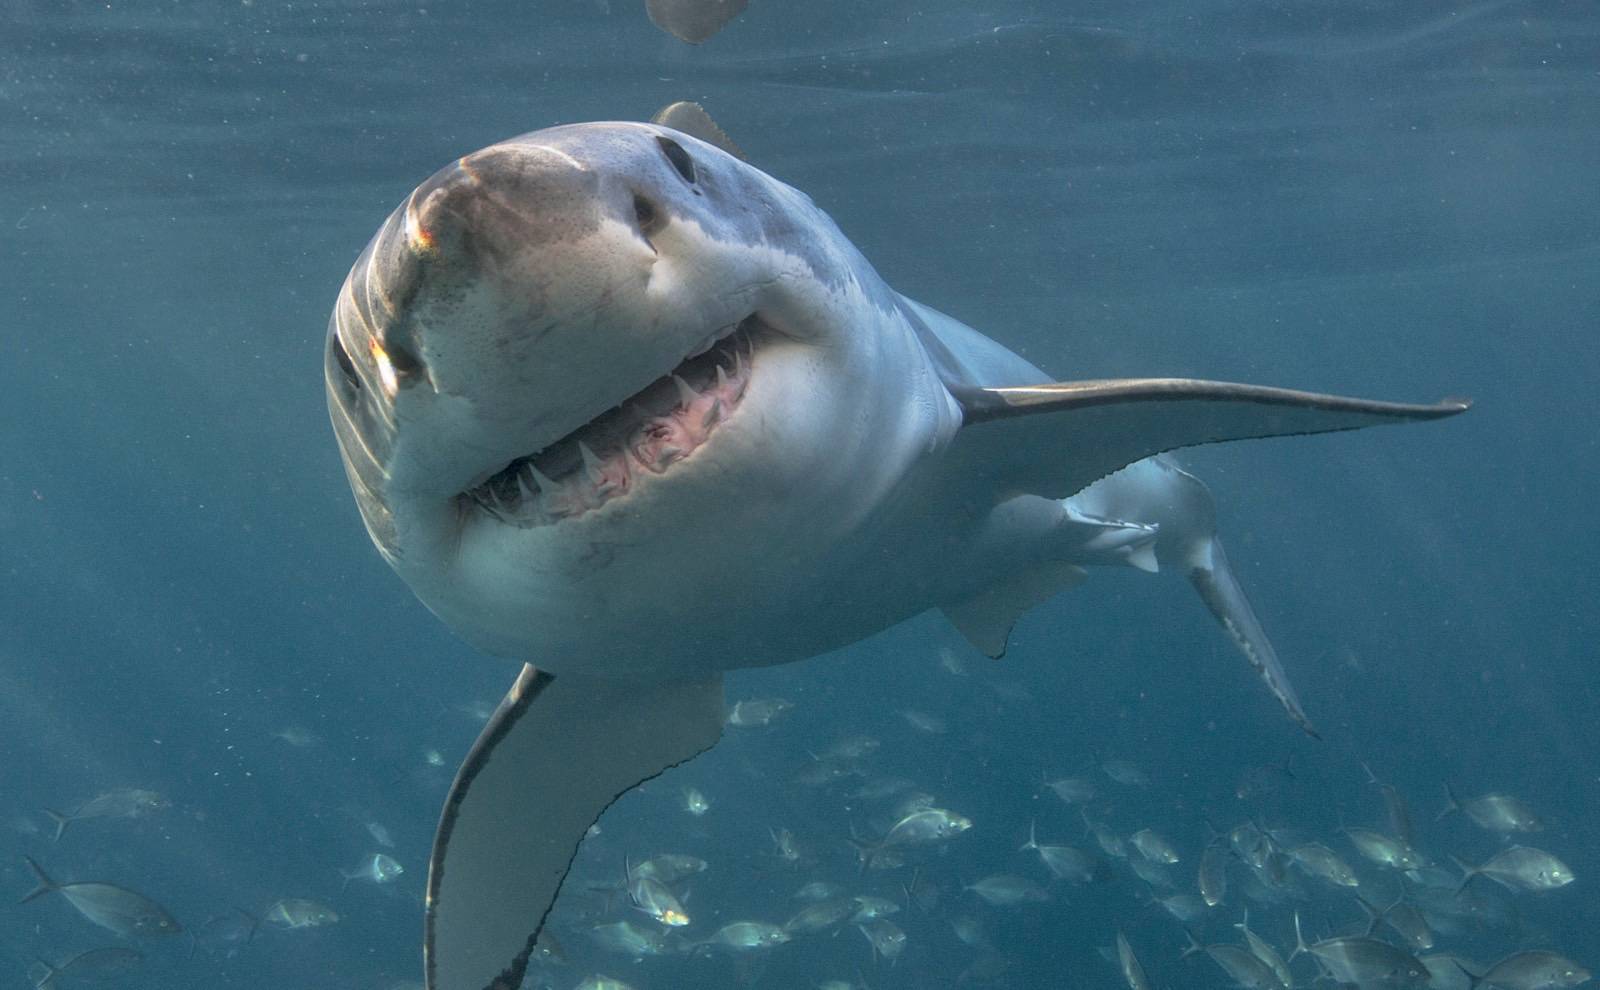 Mutated shark with a ‘human face’ stumbled on by fisherman